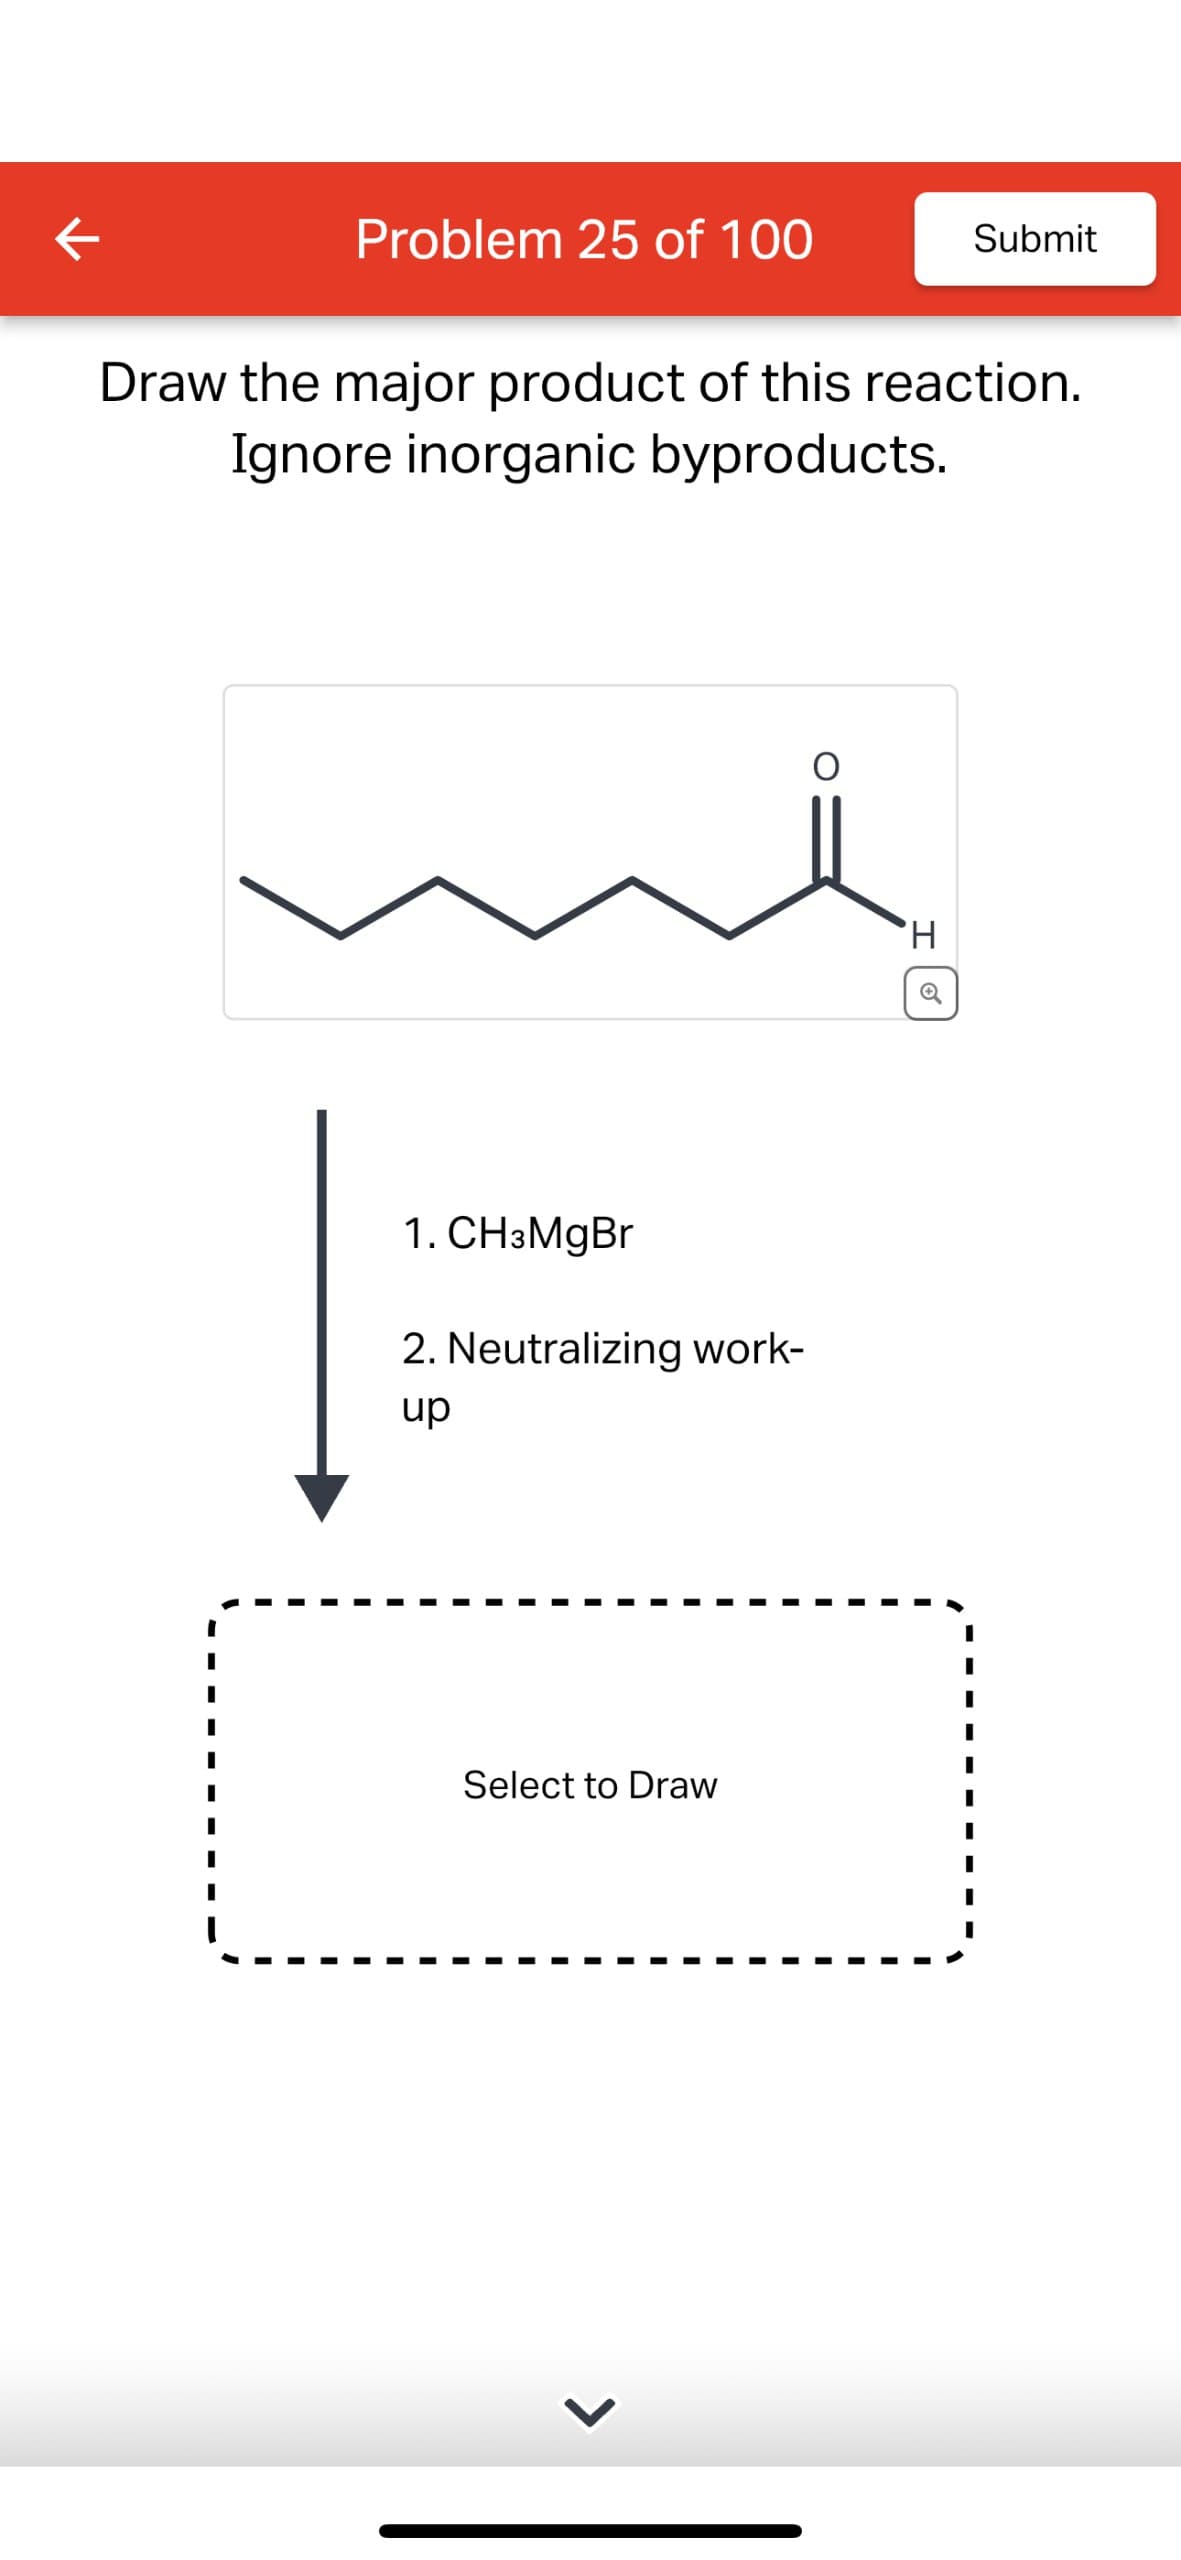 Problem 25 of 100
Submit
Draw the major product of this reaction.
Ignore inorganic byproducts.
1. CH3MgBr
2. Neutralizing work-
up
Select to Draw
'H